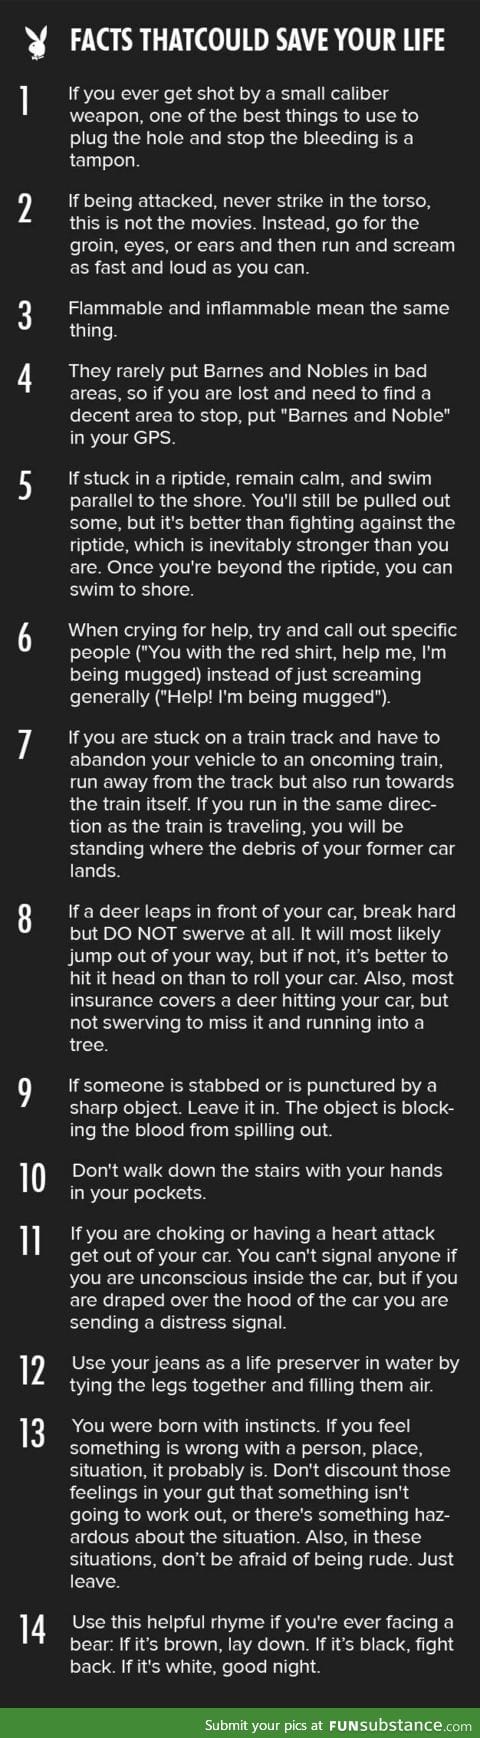 14 tips that could save your life